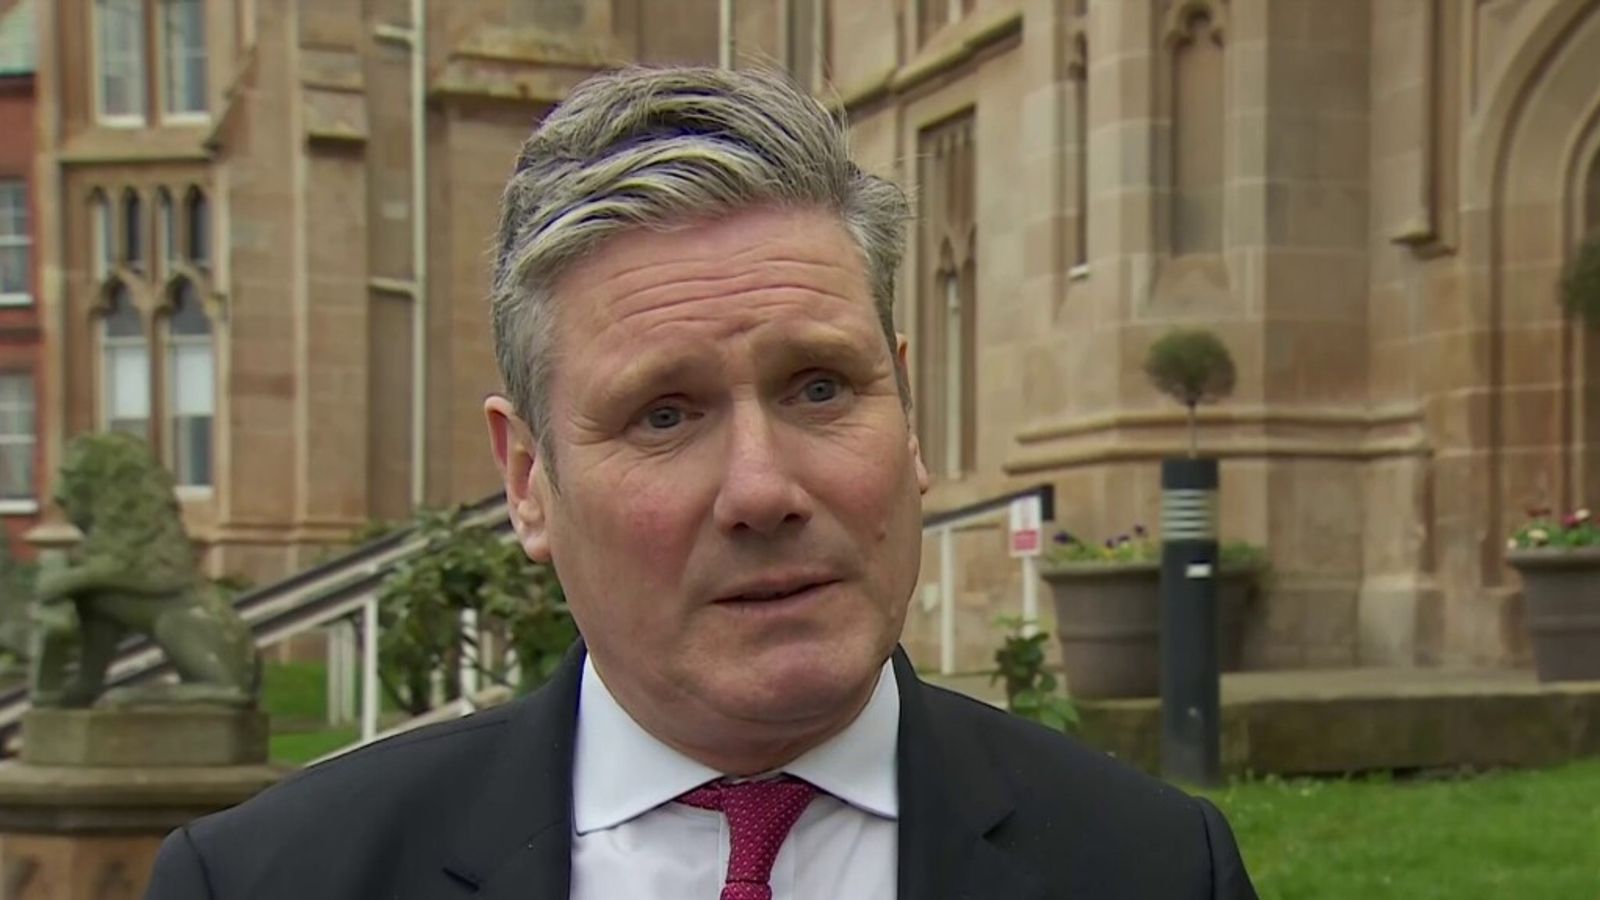 Sir Keir Starmer reveals how much tax he paid in UK - a day after Rishi Sunak did the same